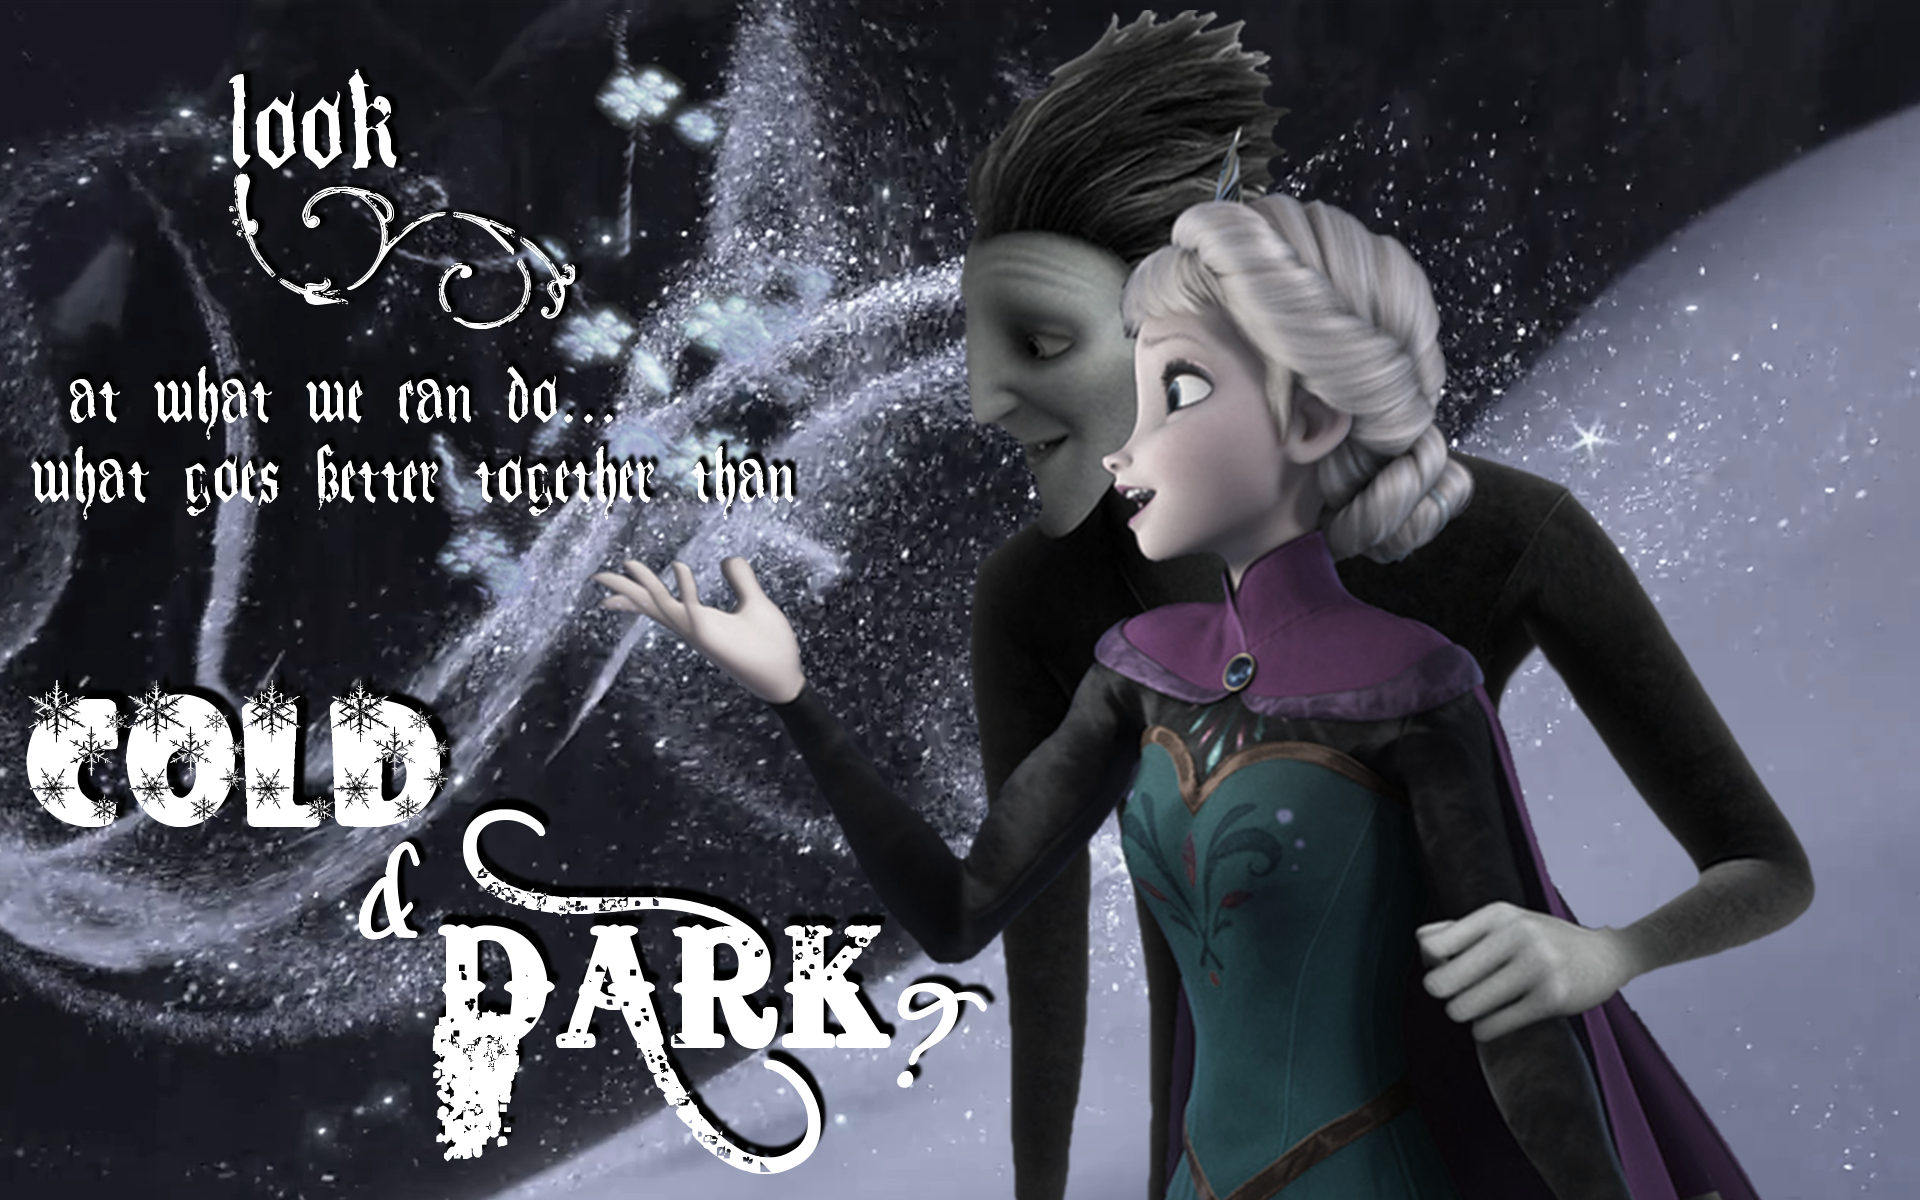 What goes better together than Cold and Dark? - Elsa and Pitch Wallpaper  (36460291) - Fanpop